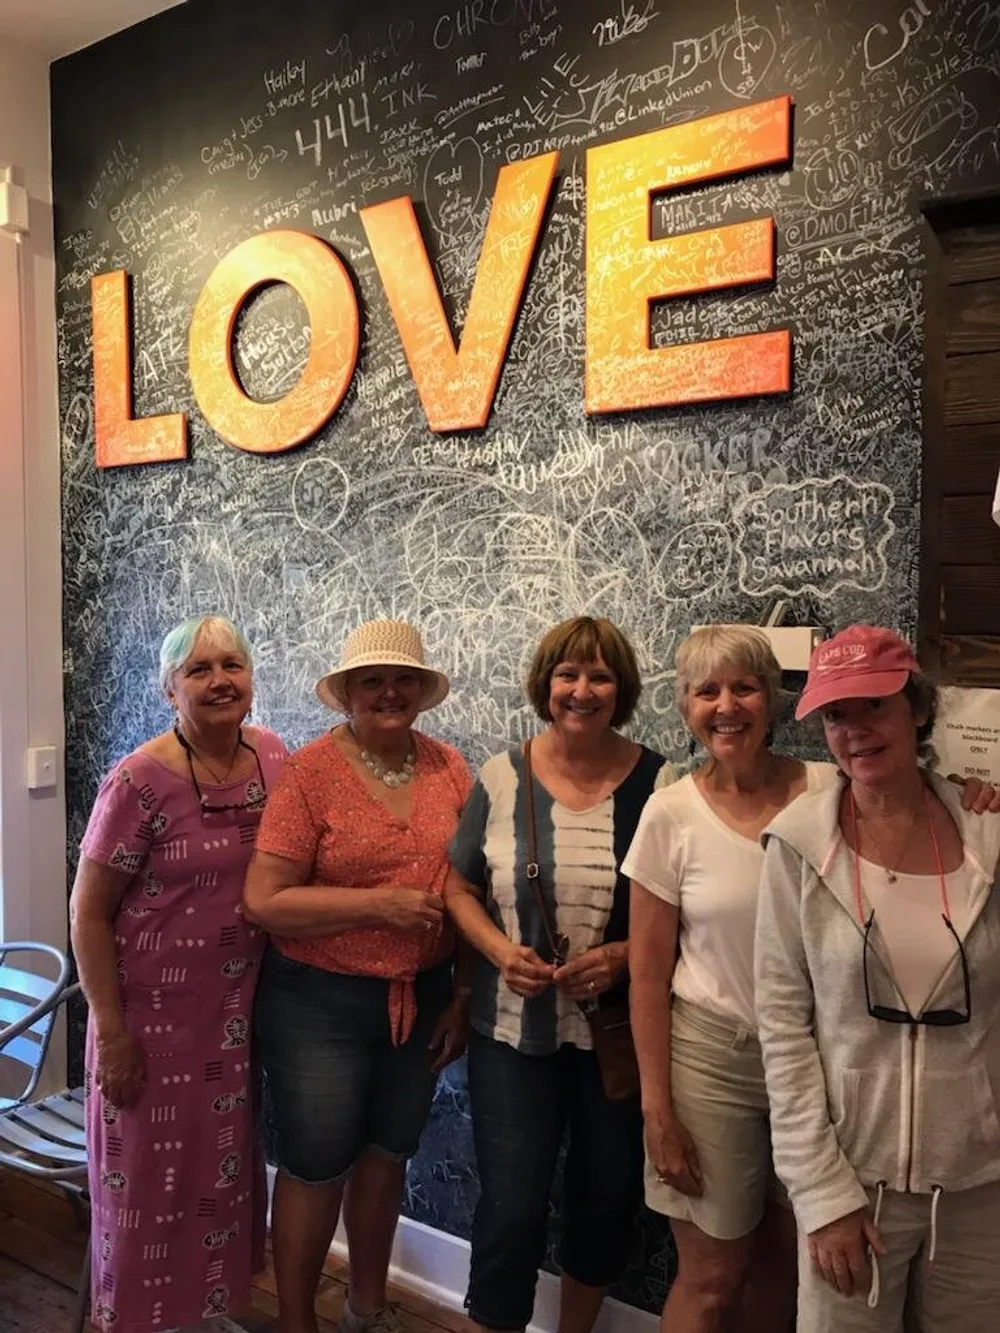 Five women are smiling in front of a wall with the word LOVE written in large letters surrounded by numerous scribbles and signatures from various visitors